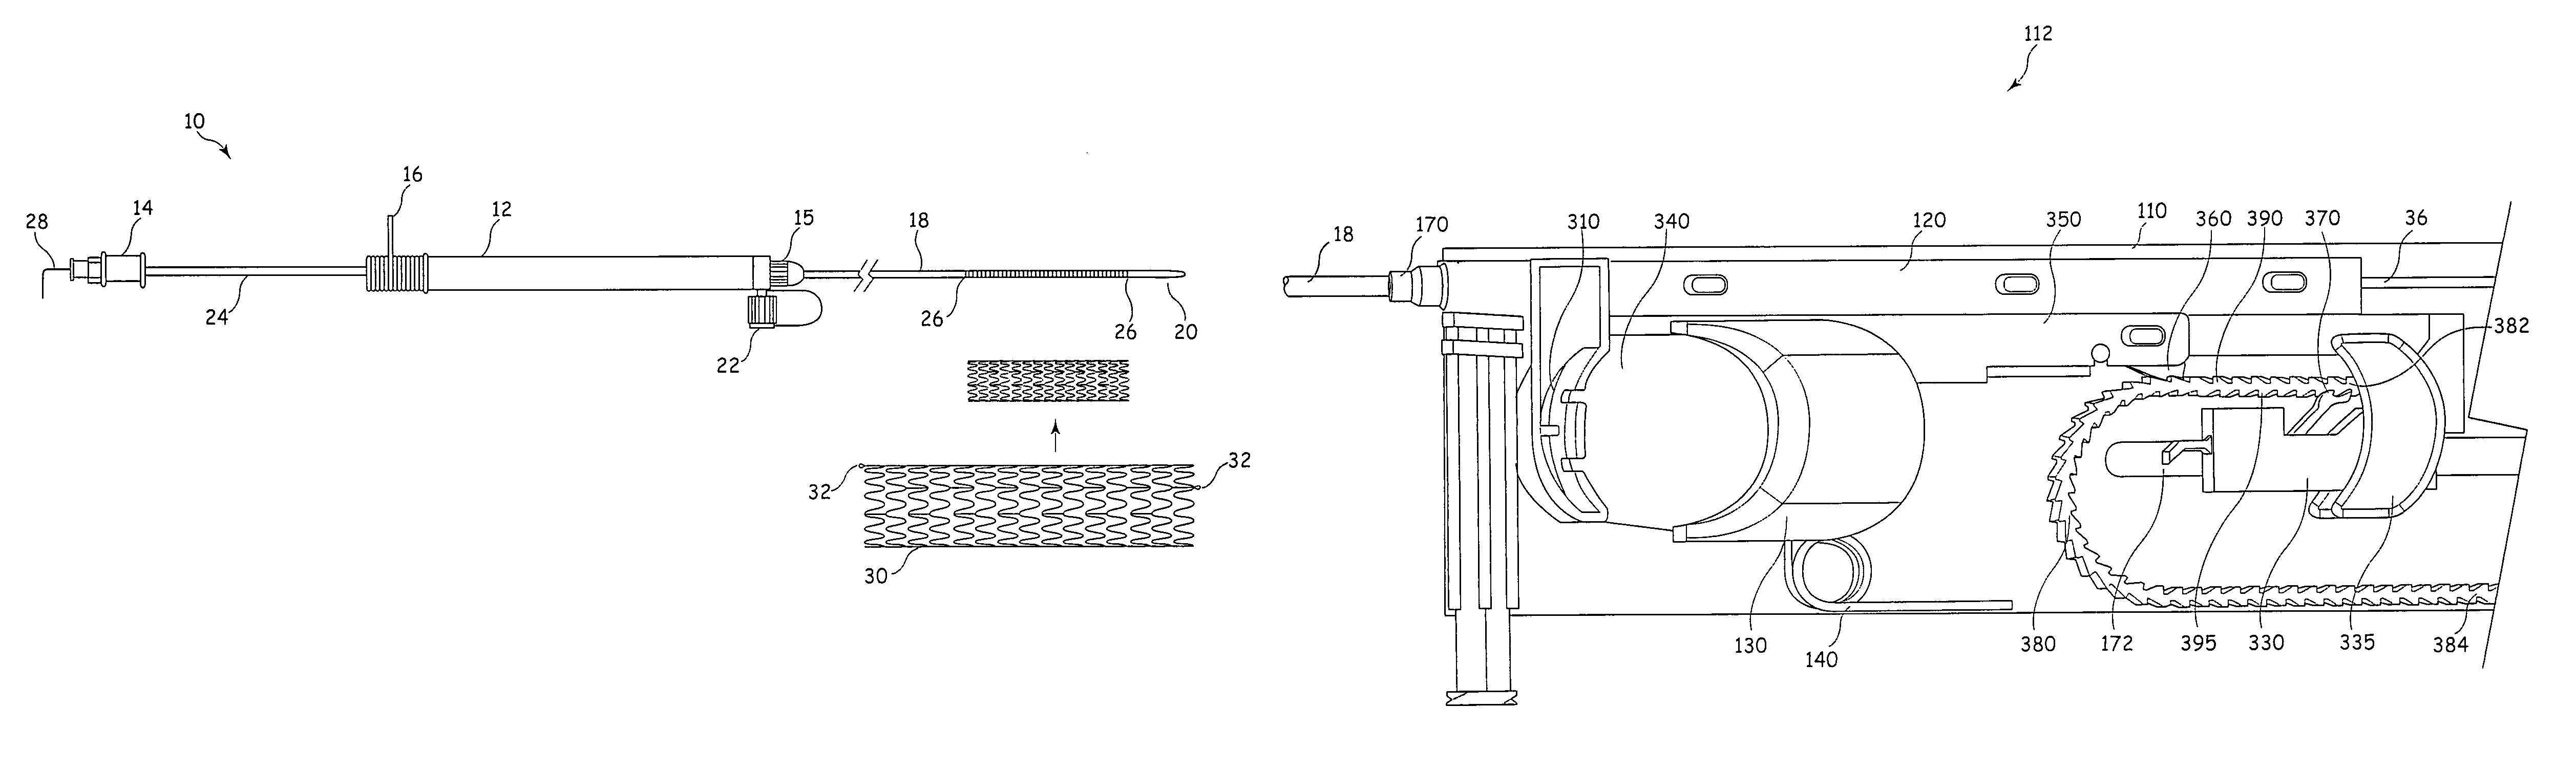 Deployment handle for an implant deployment device